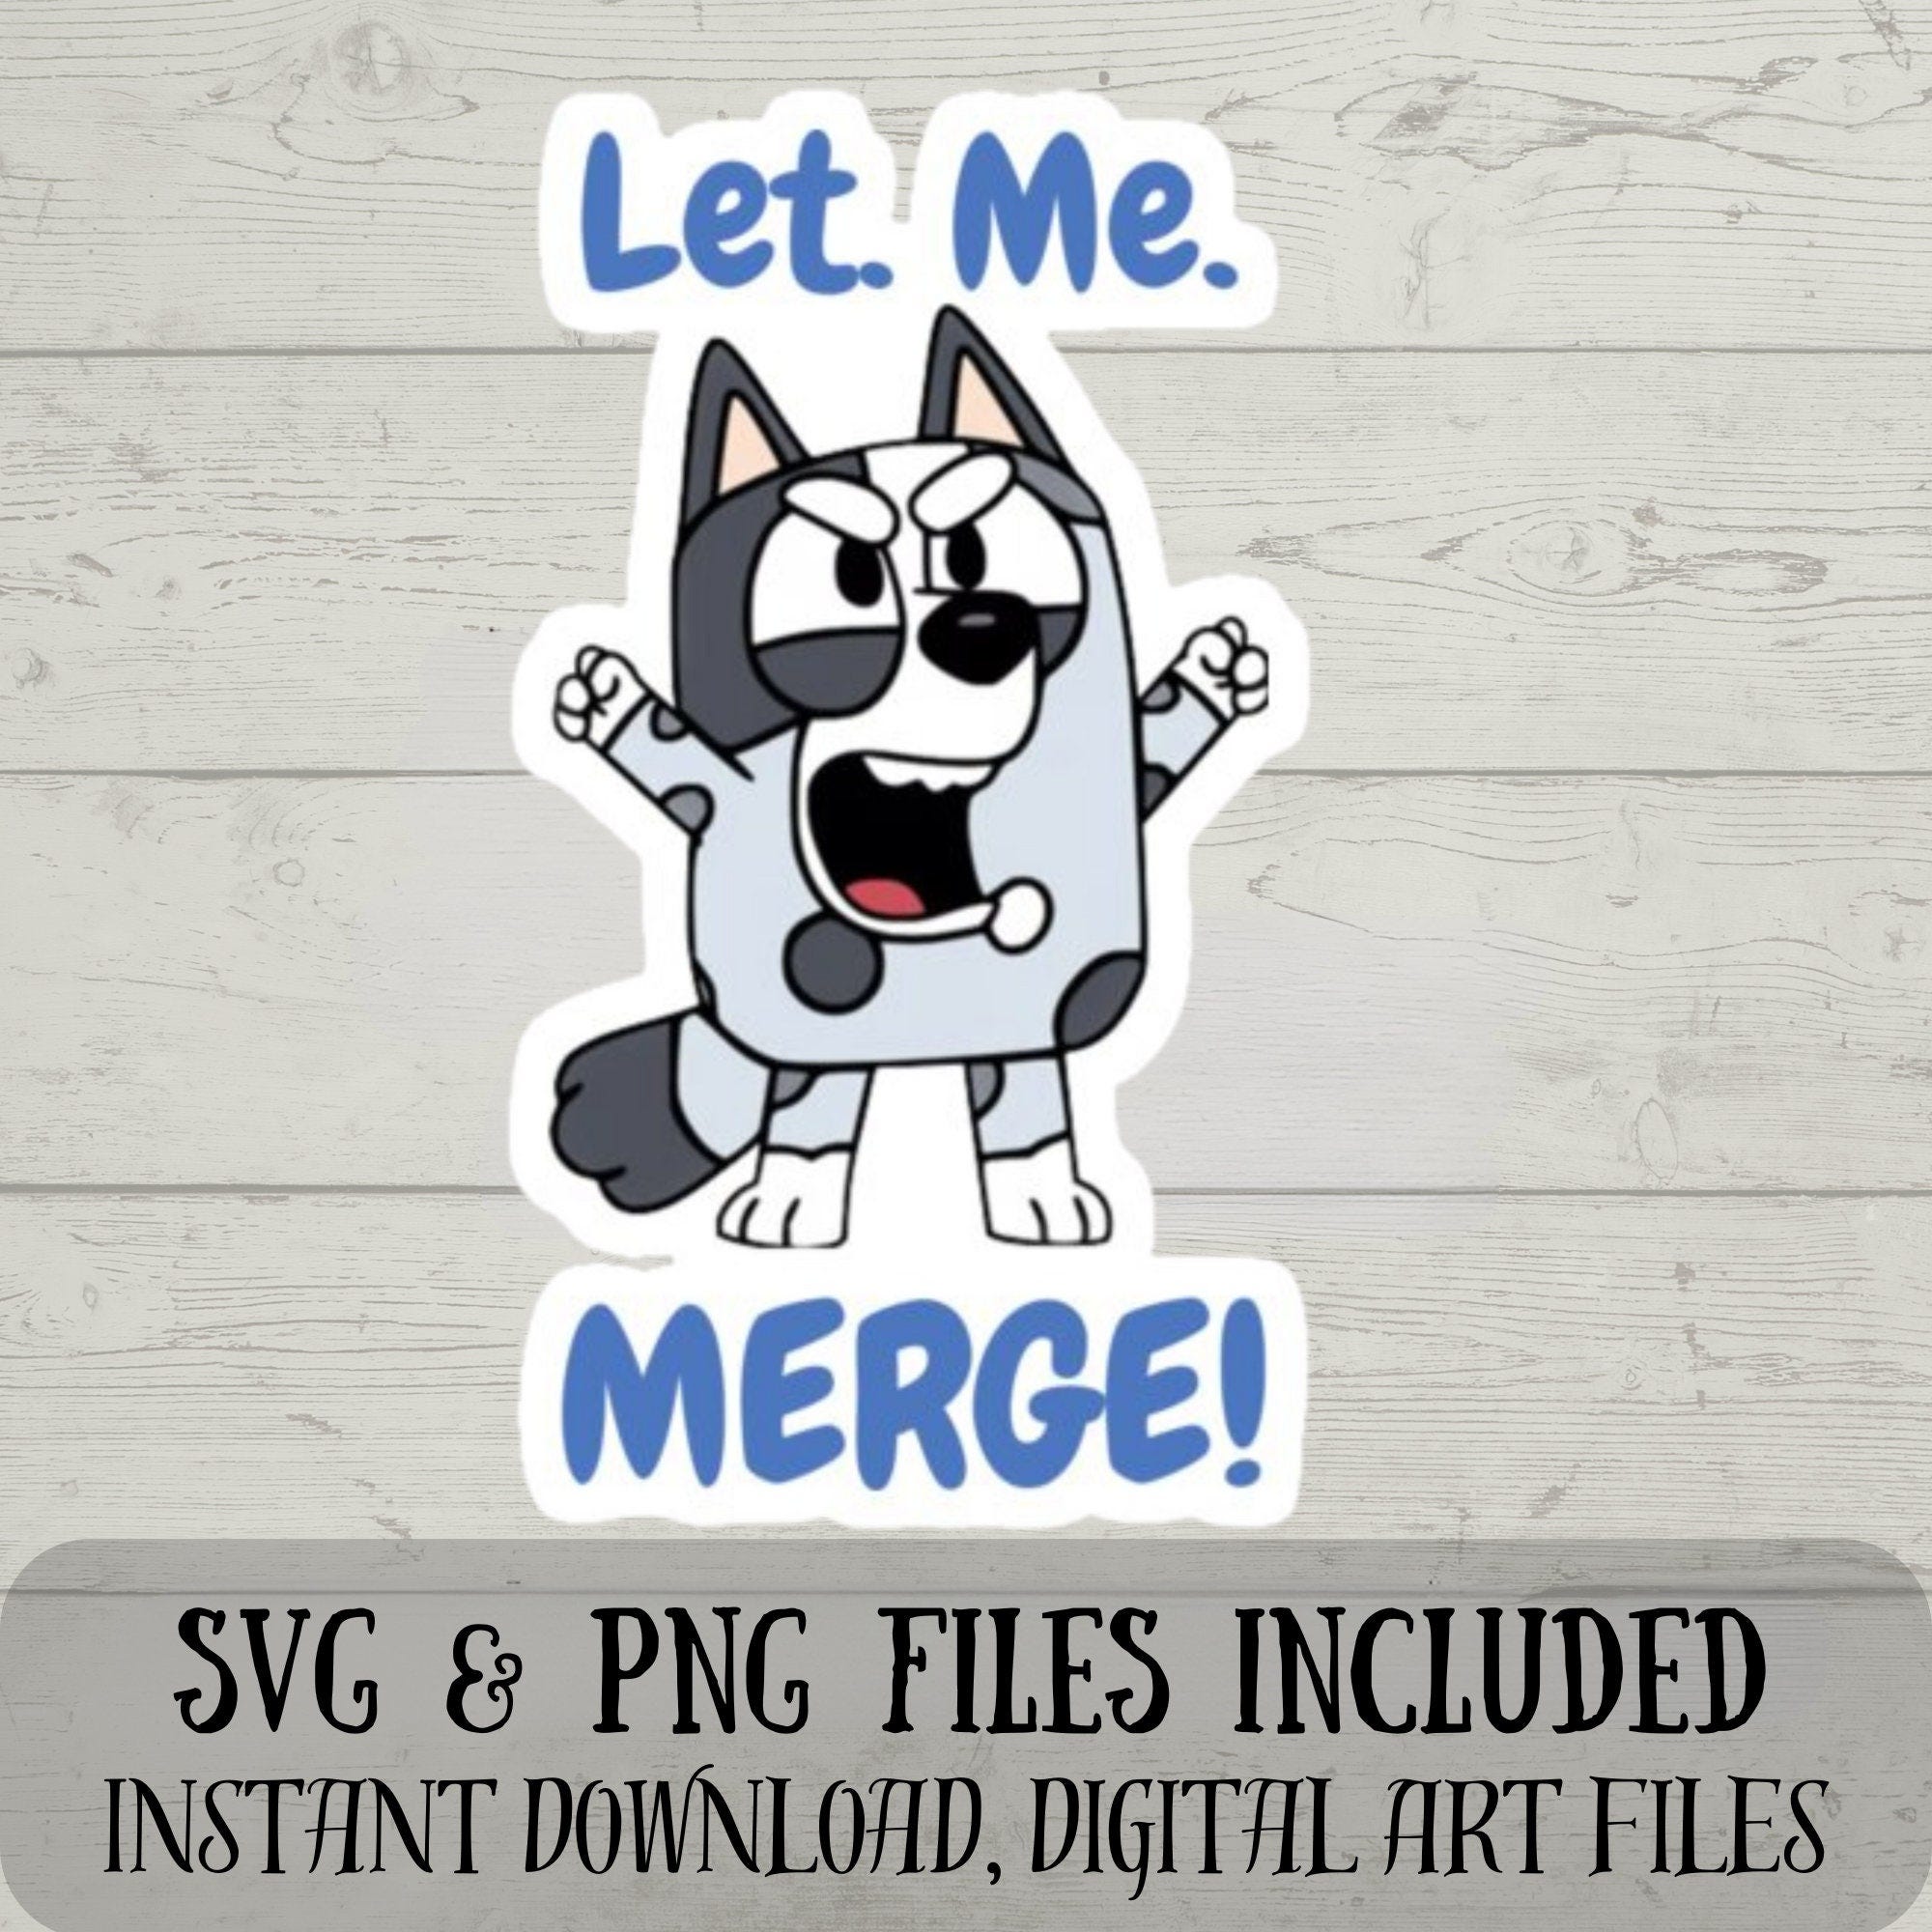 Let me Merge SVG - Funny Muffin SVG - Bluey SVG - Digital Download Fun Crafting- Let me Merge for the Road Rage - svg and png files included